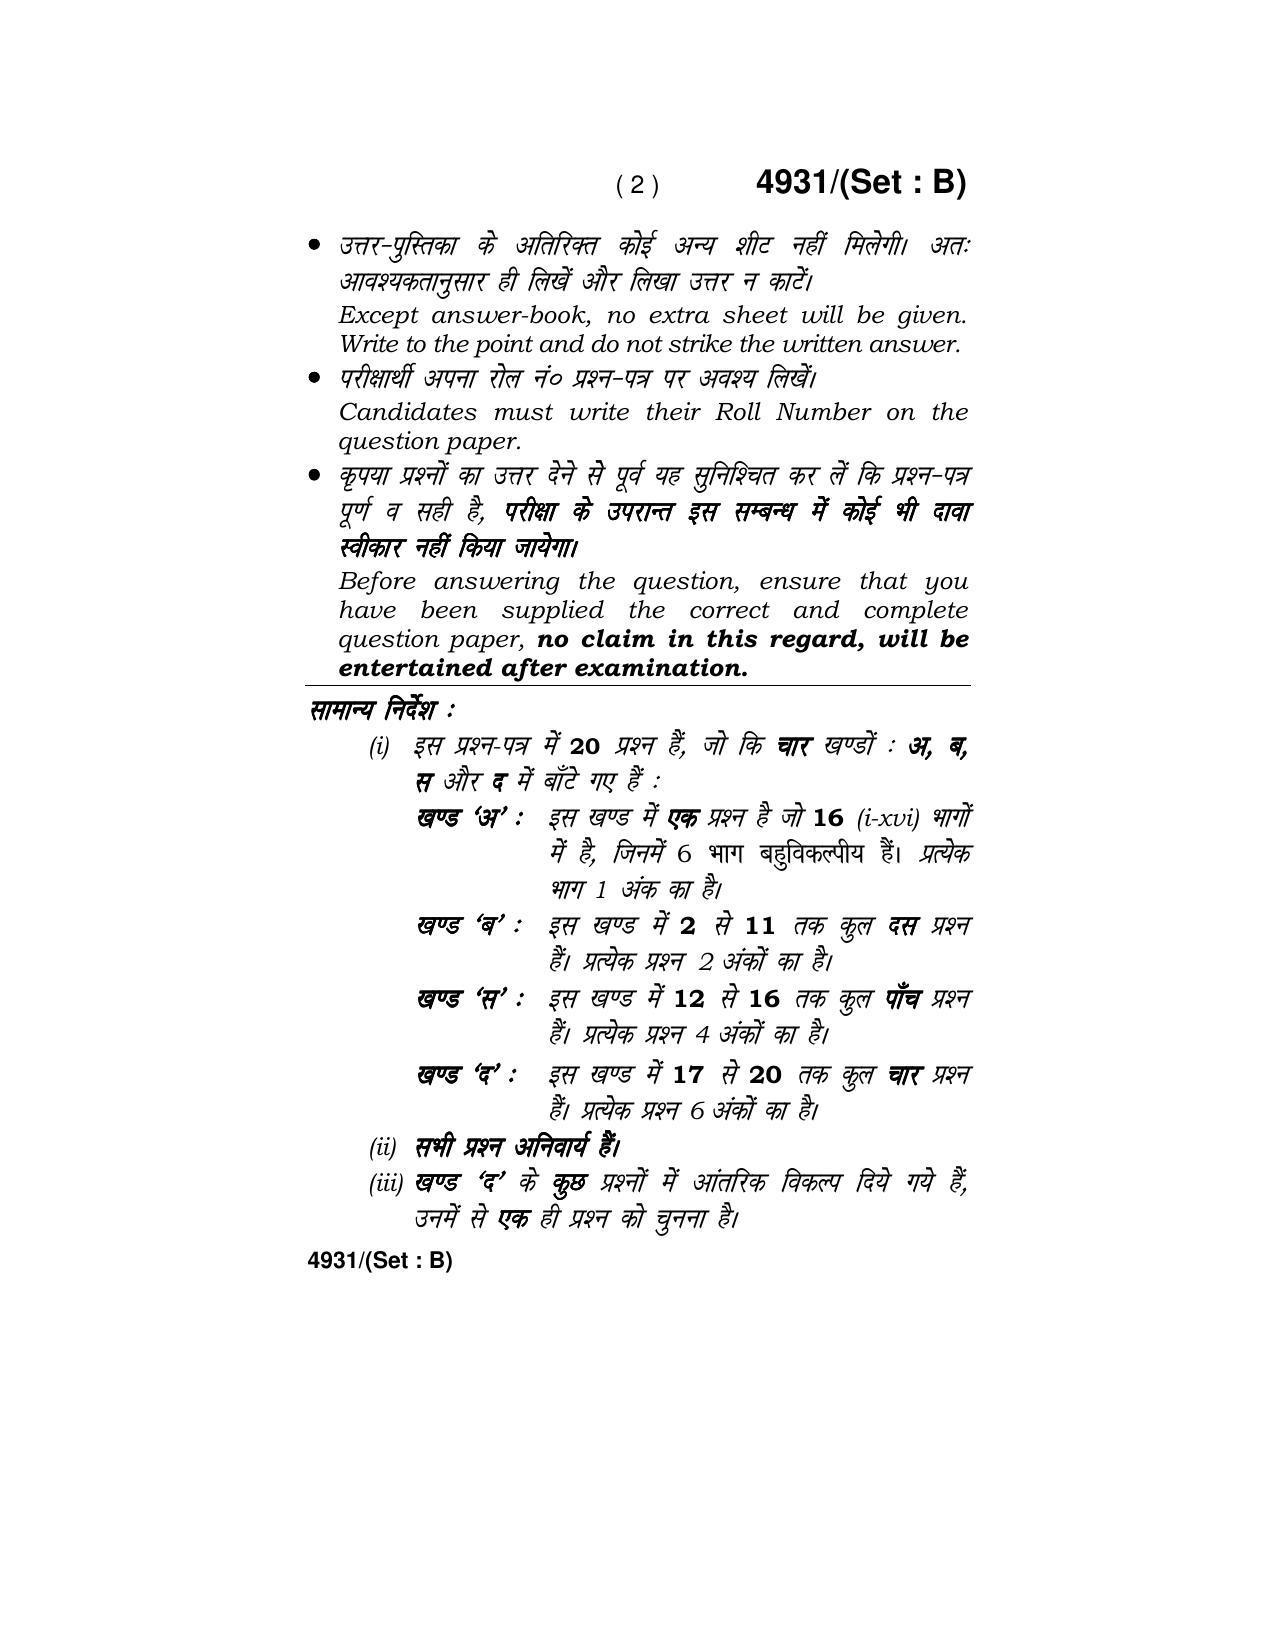 Haryana Board HBSE Class 12 Mathematics 2020 Question Paper - Page 18